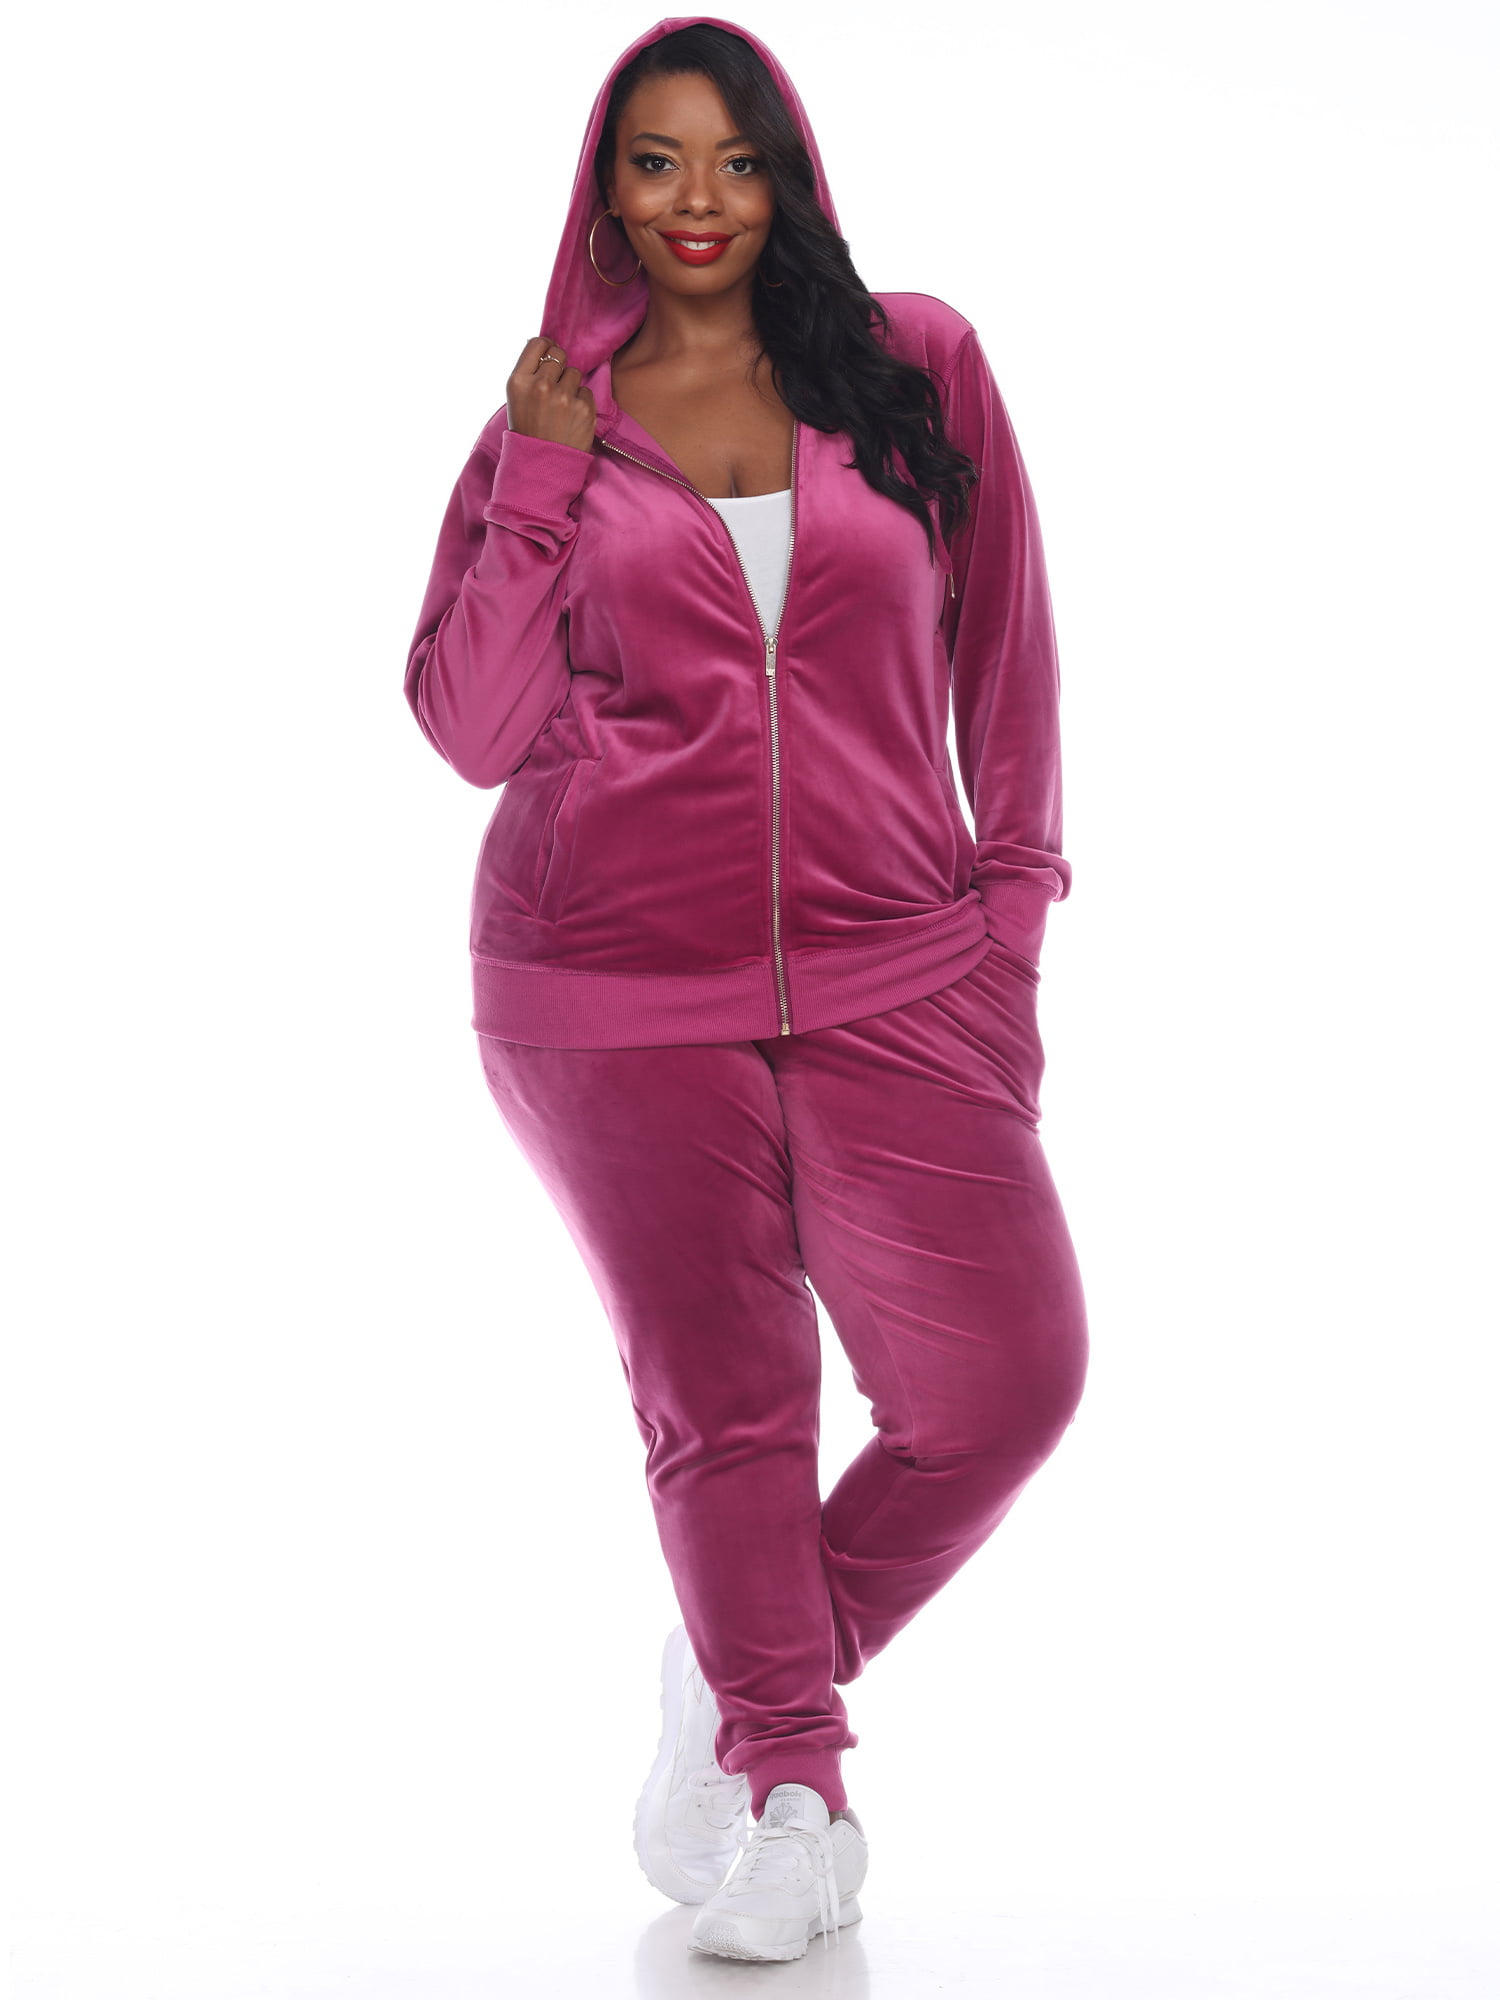 Cheap Women's Tracksuits OnSale, Discount Women's Tracksuits Free Shipping!